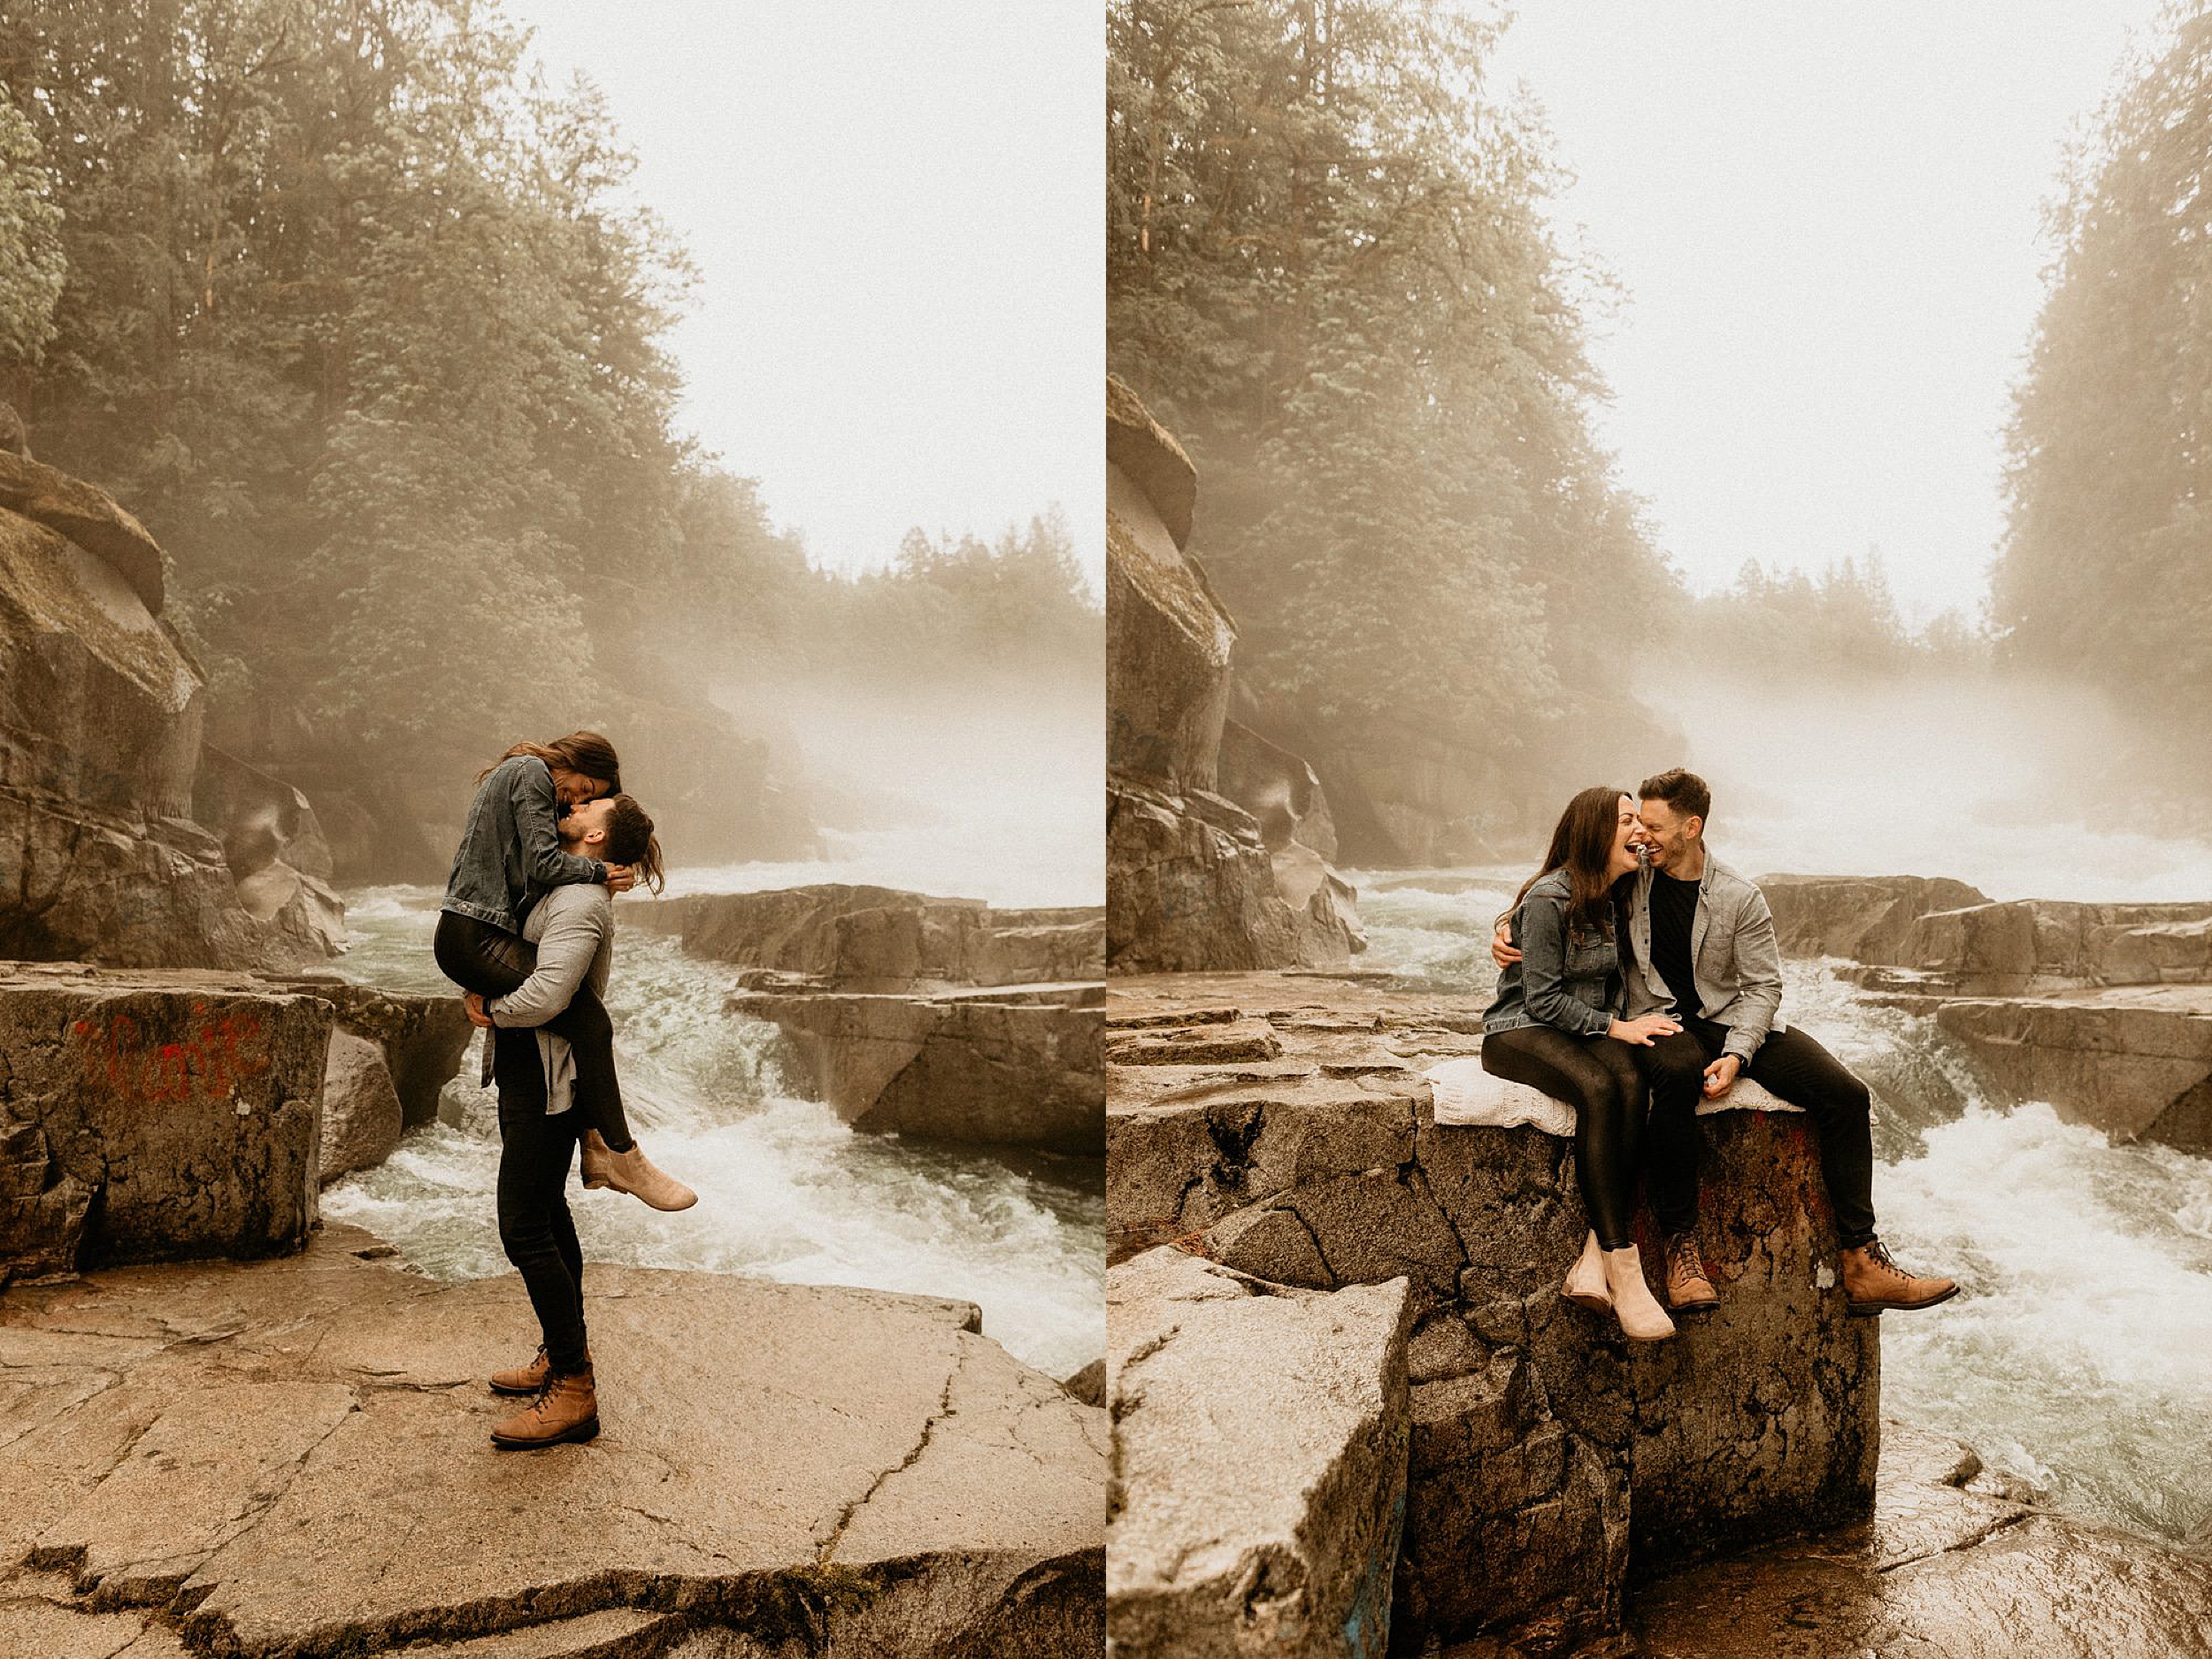 couple kissing in front of waterfall